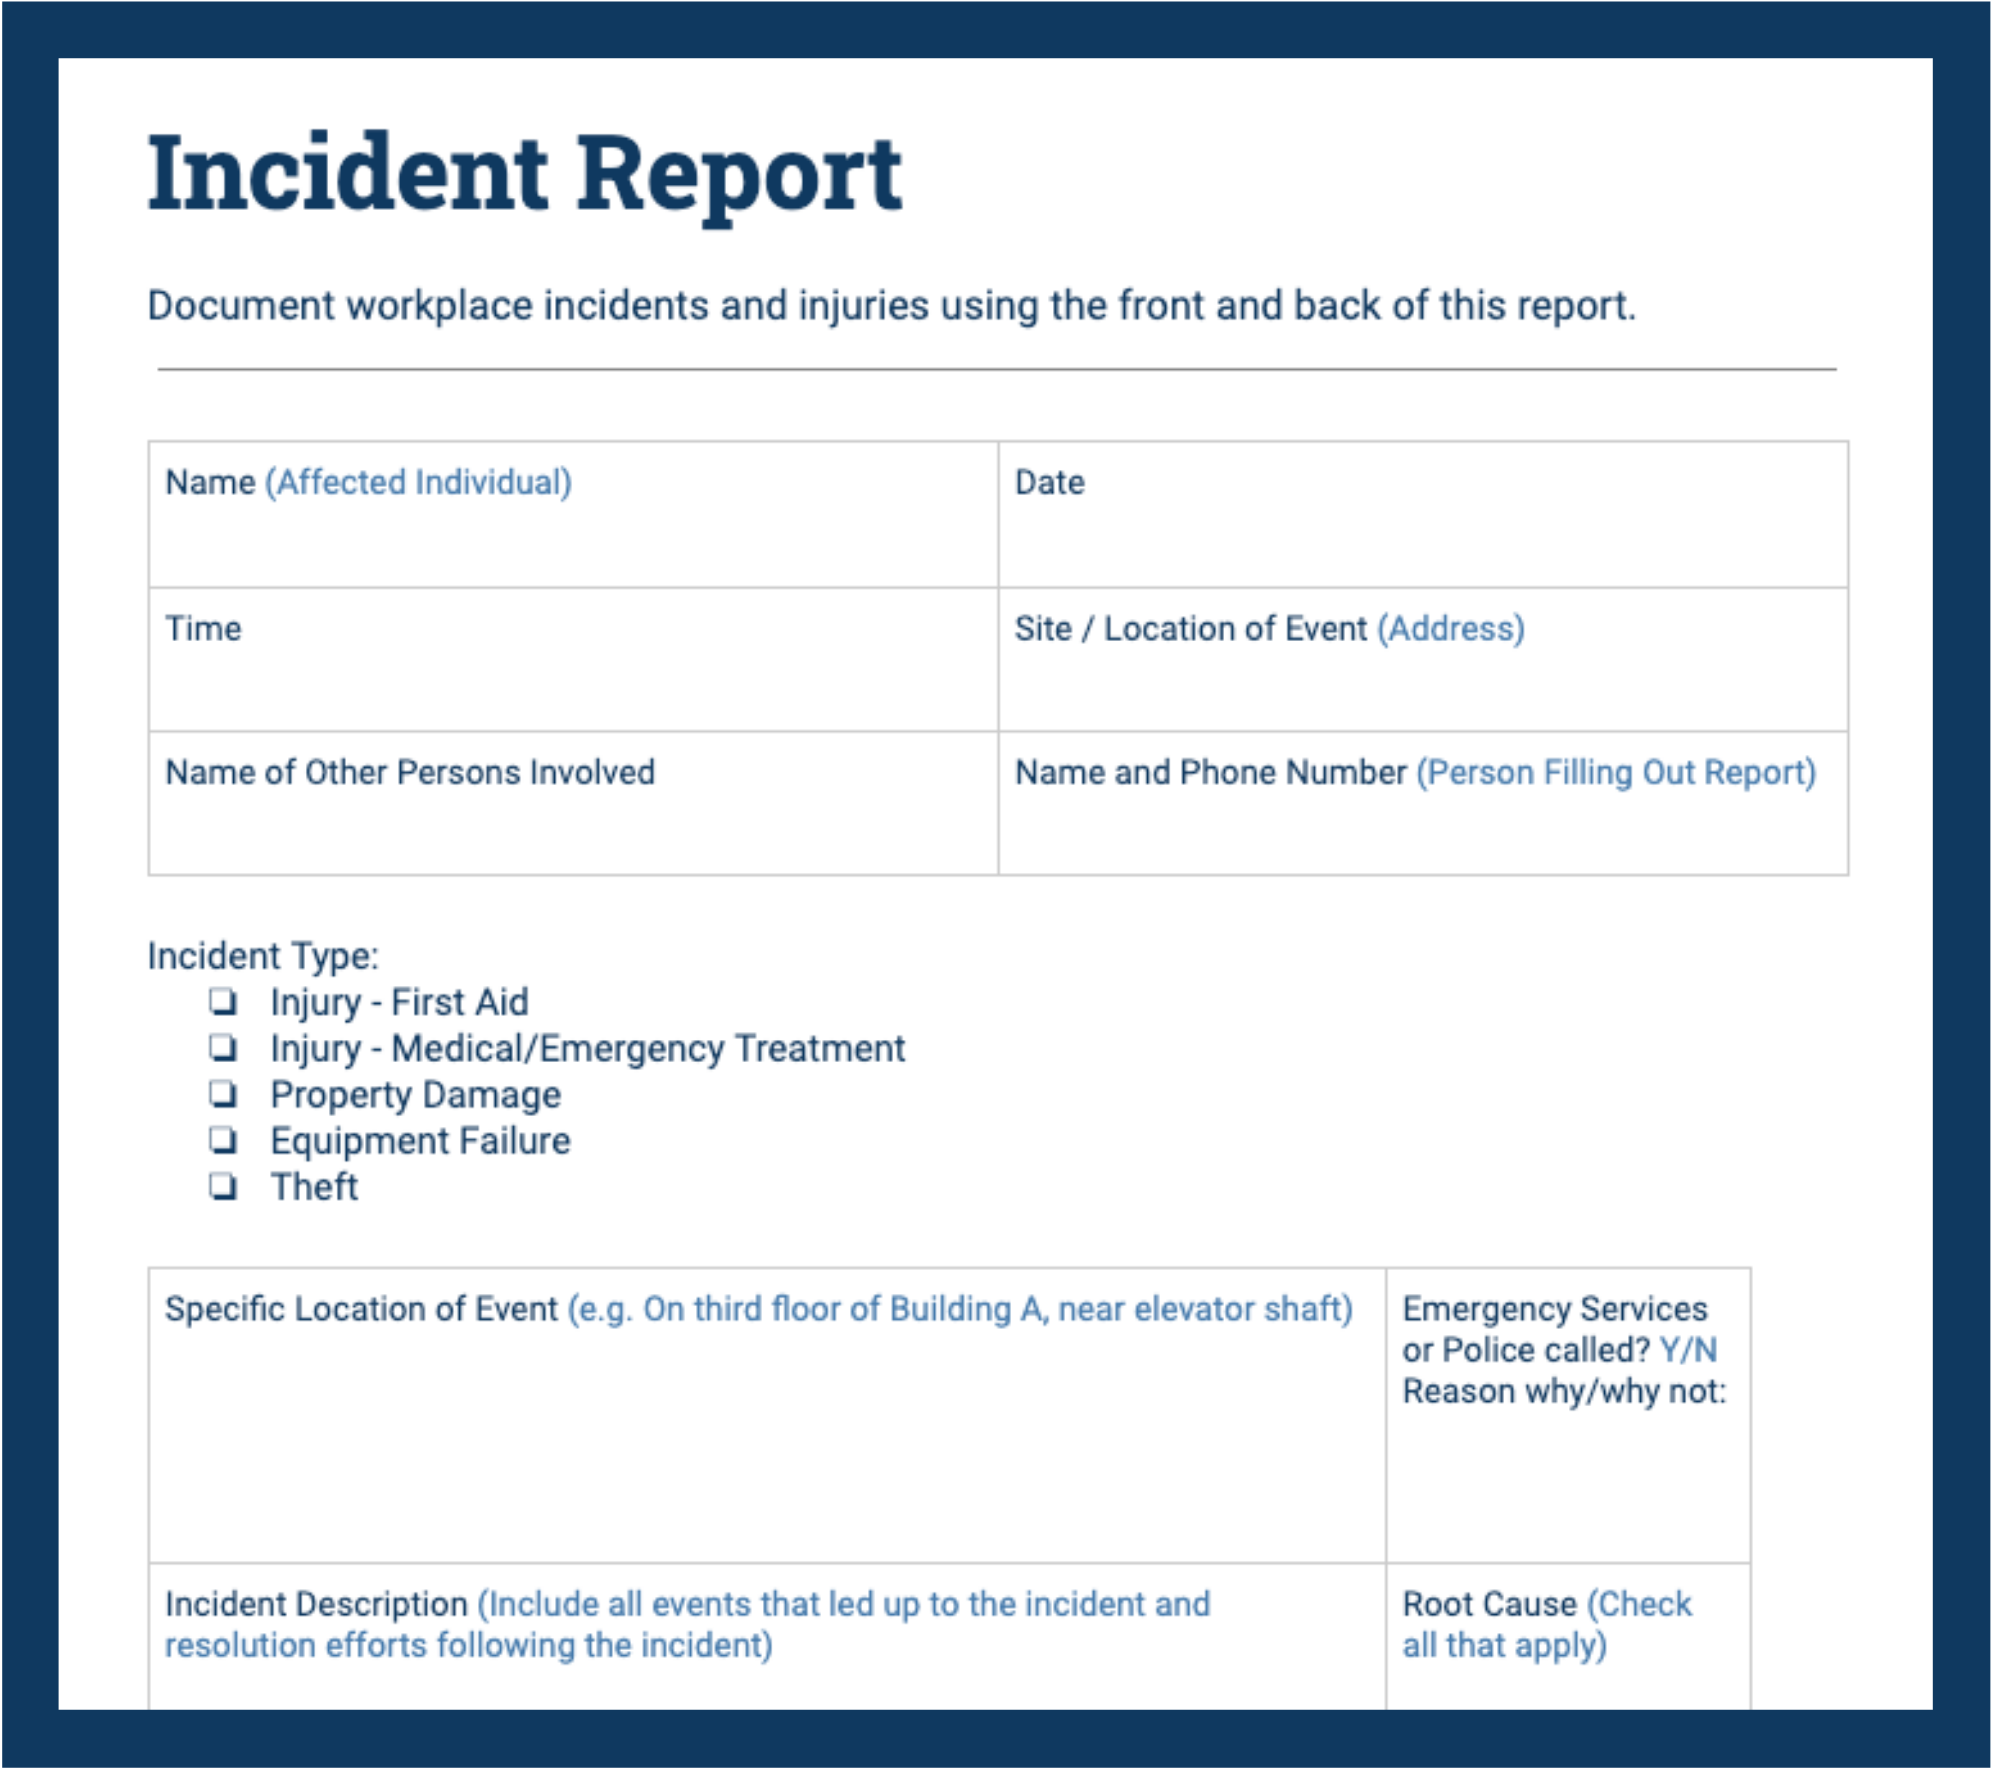 regarding-an-onsite-accident-what-kind-of-report-should-detail-what